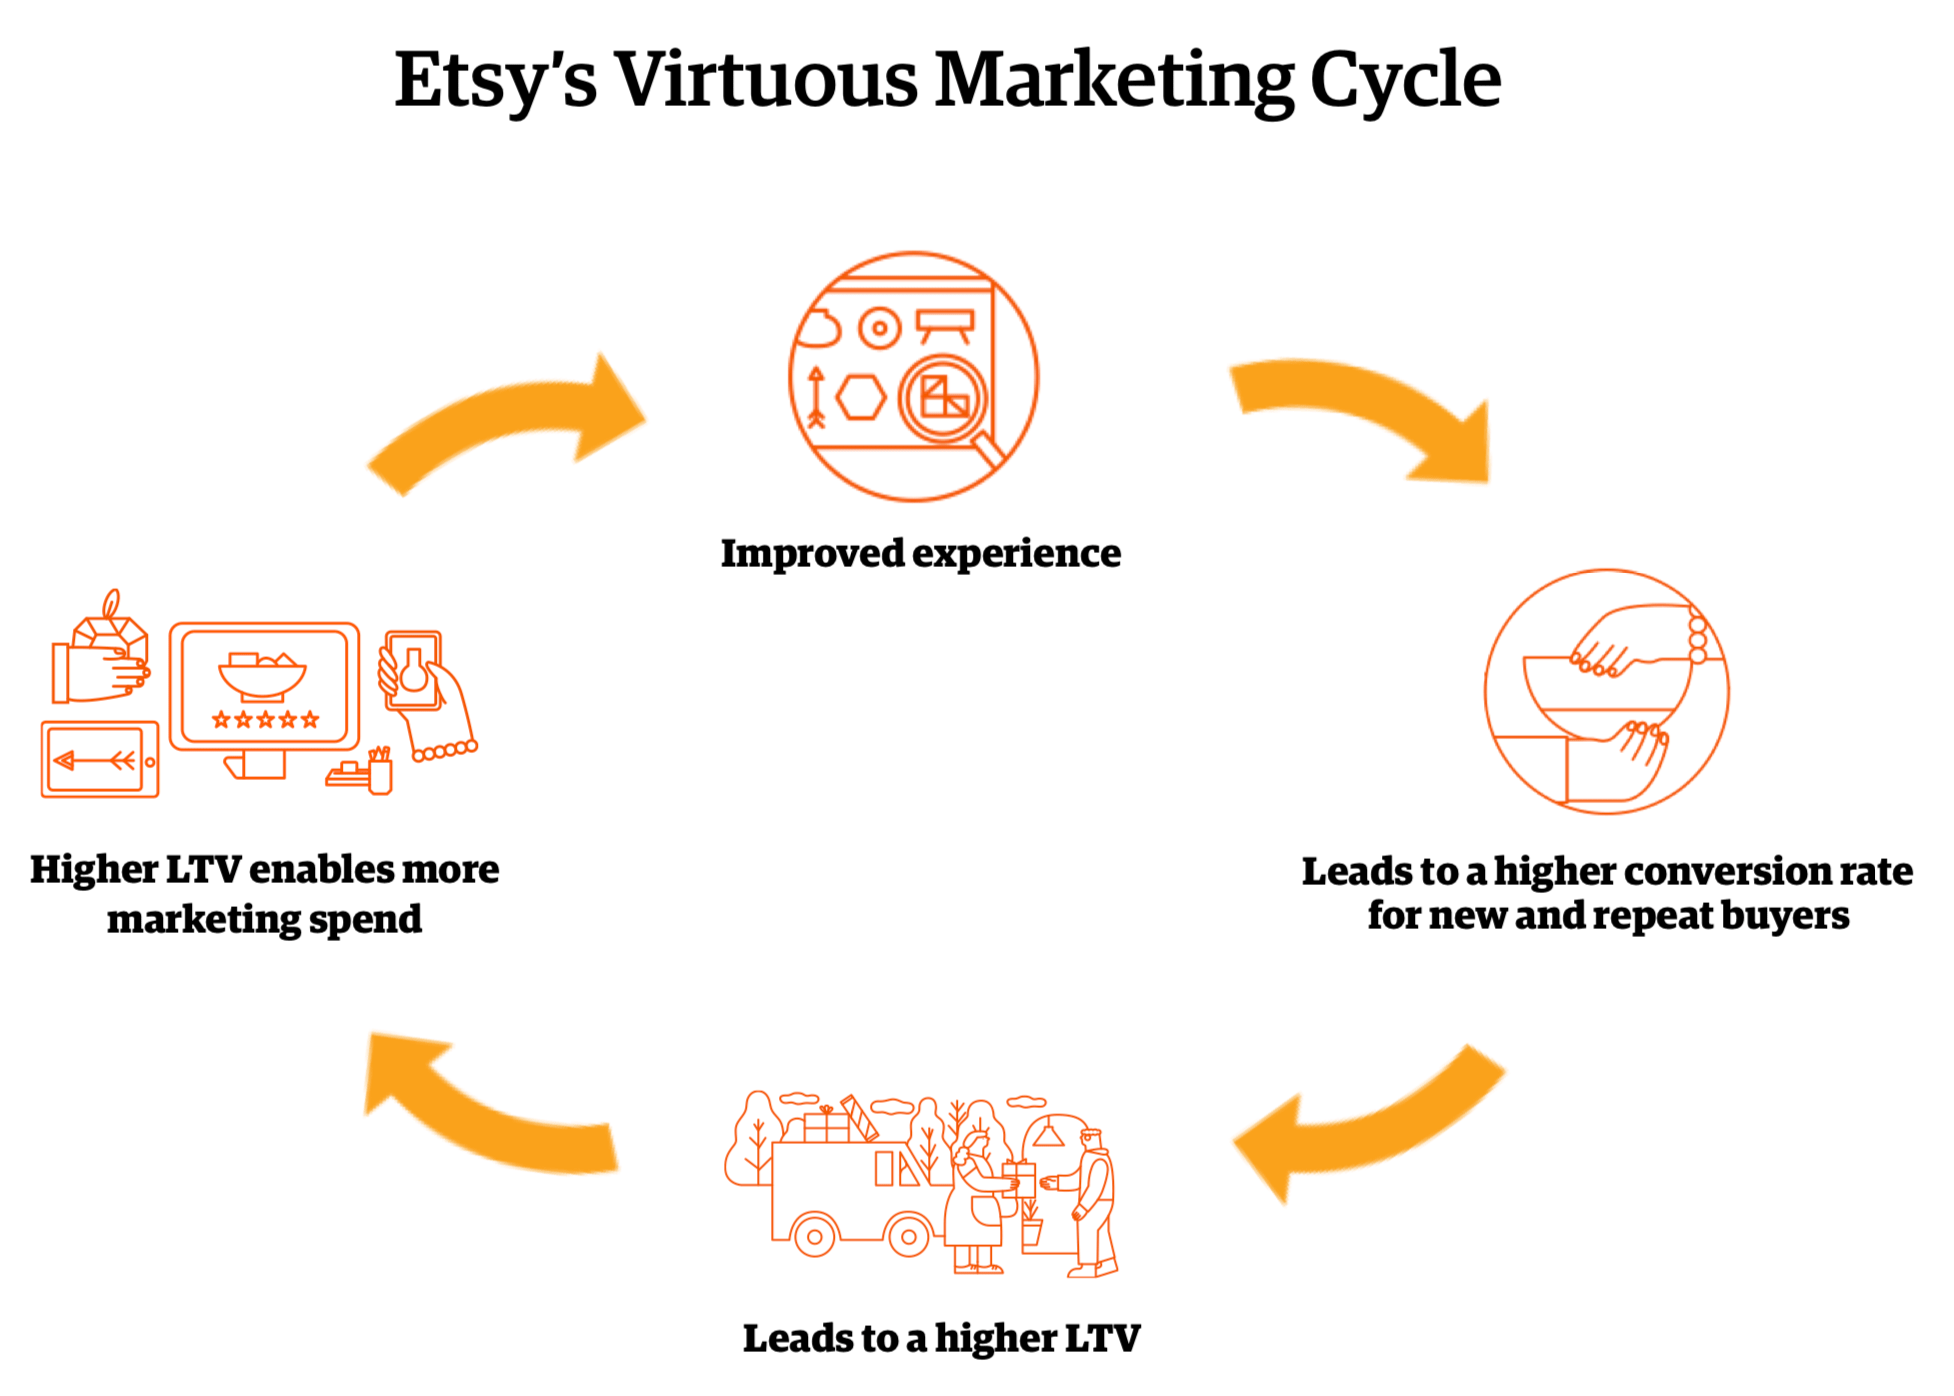 Etsy's Virtuous Marketing Cycle